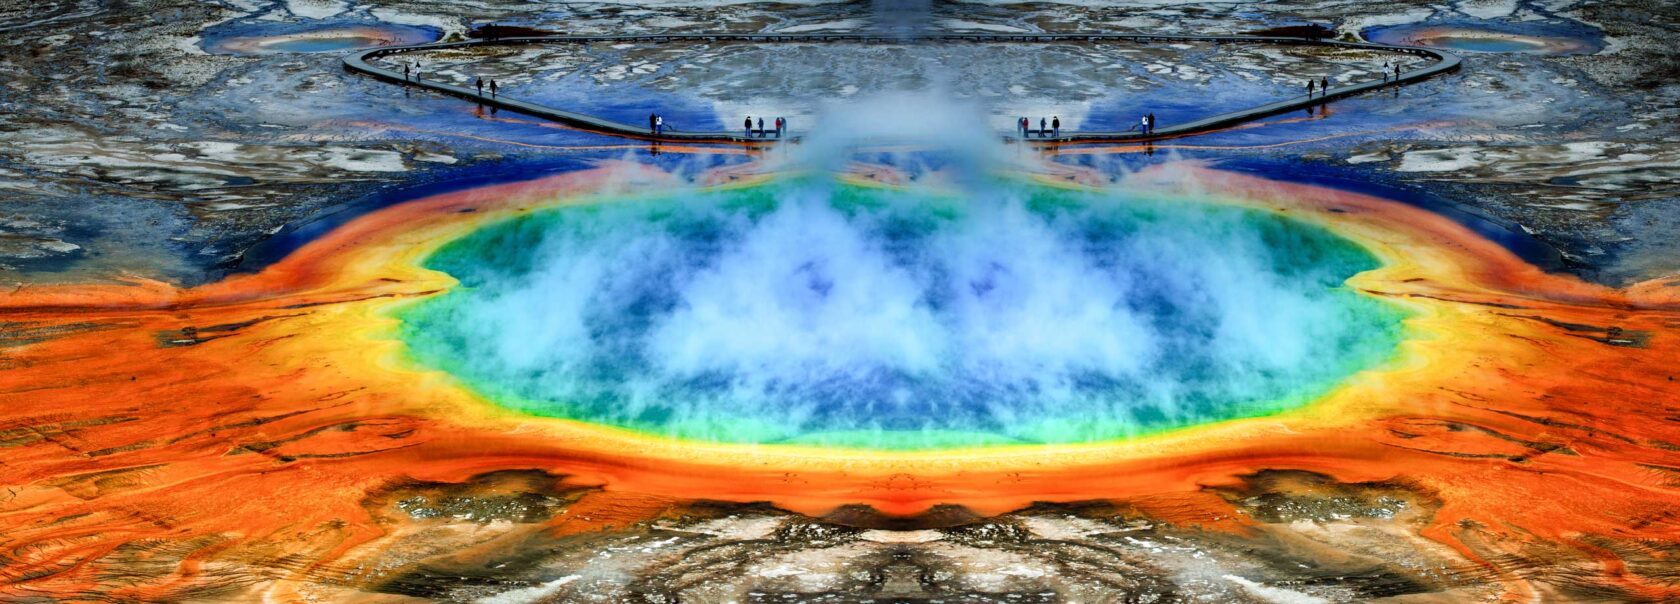 A geyser in Yellowstone National Park.